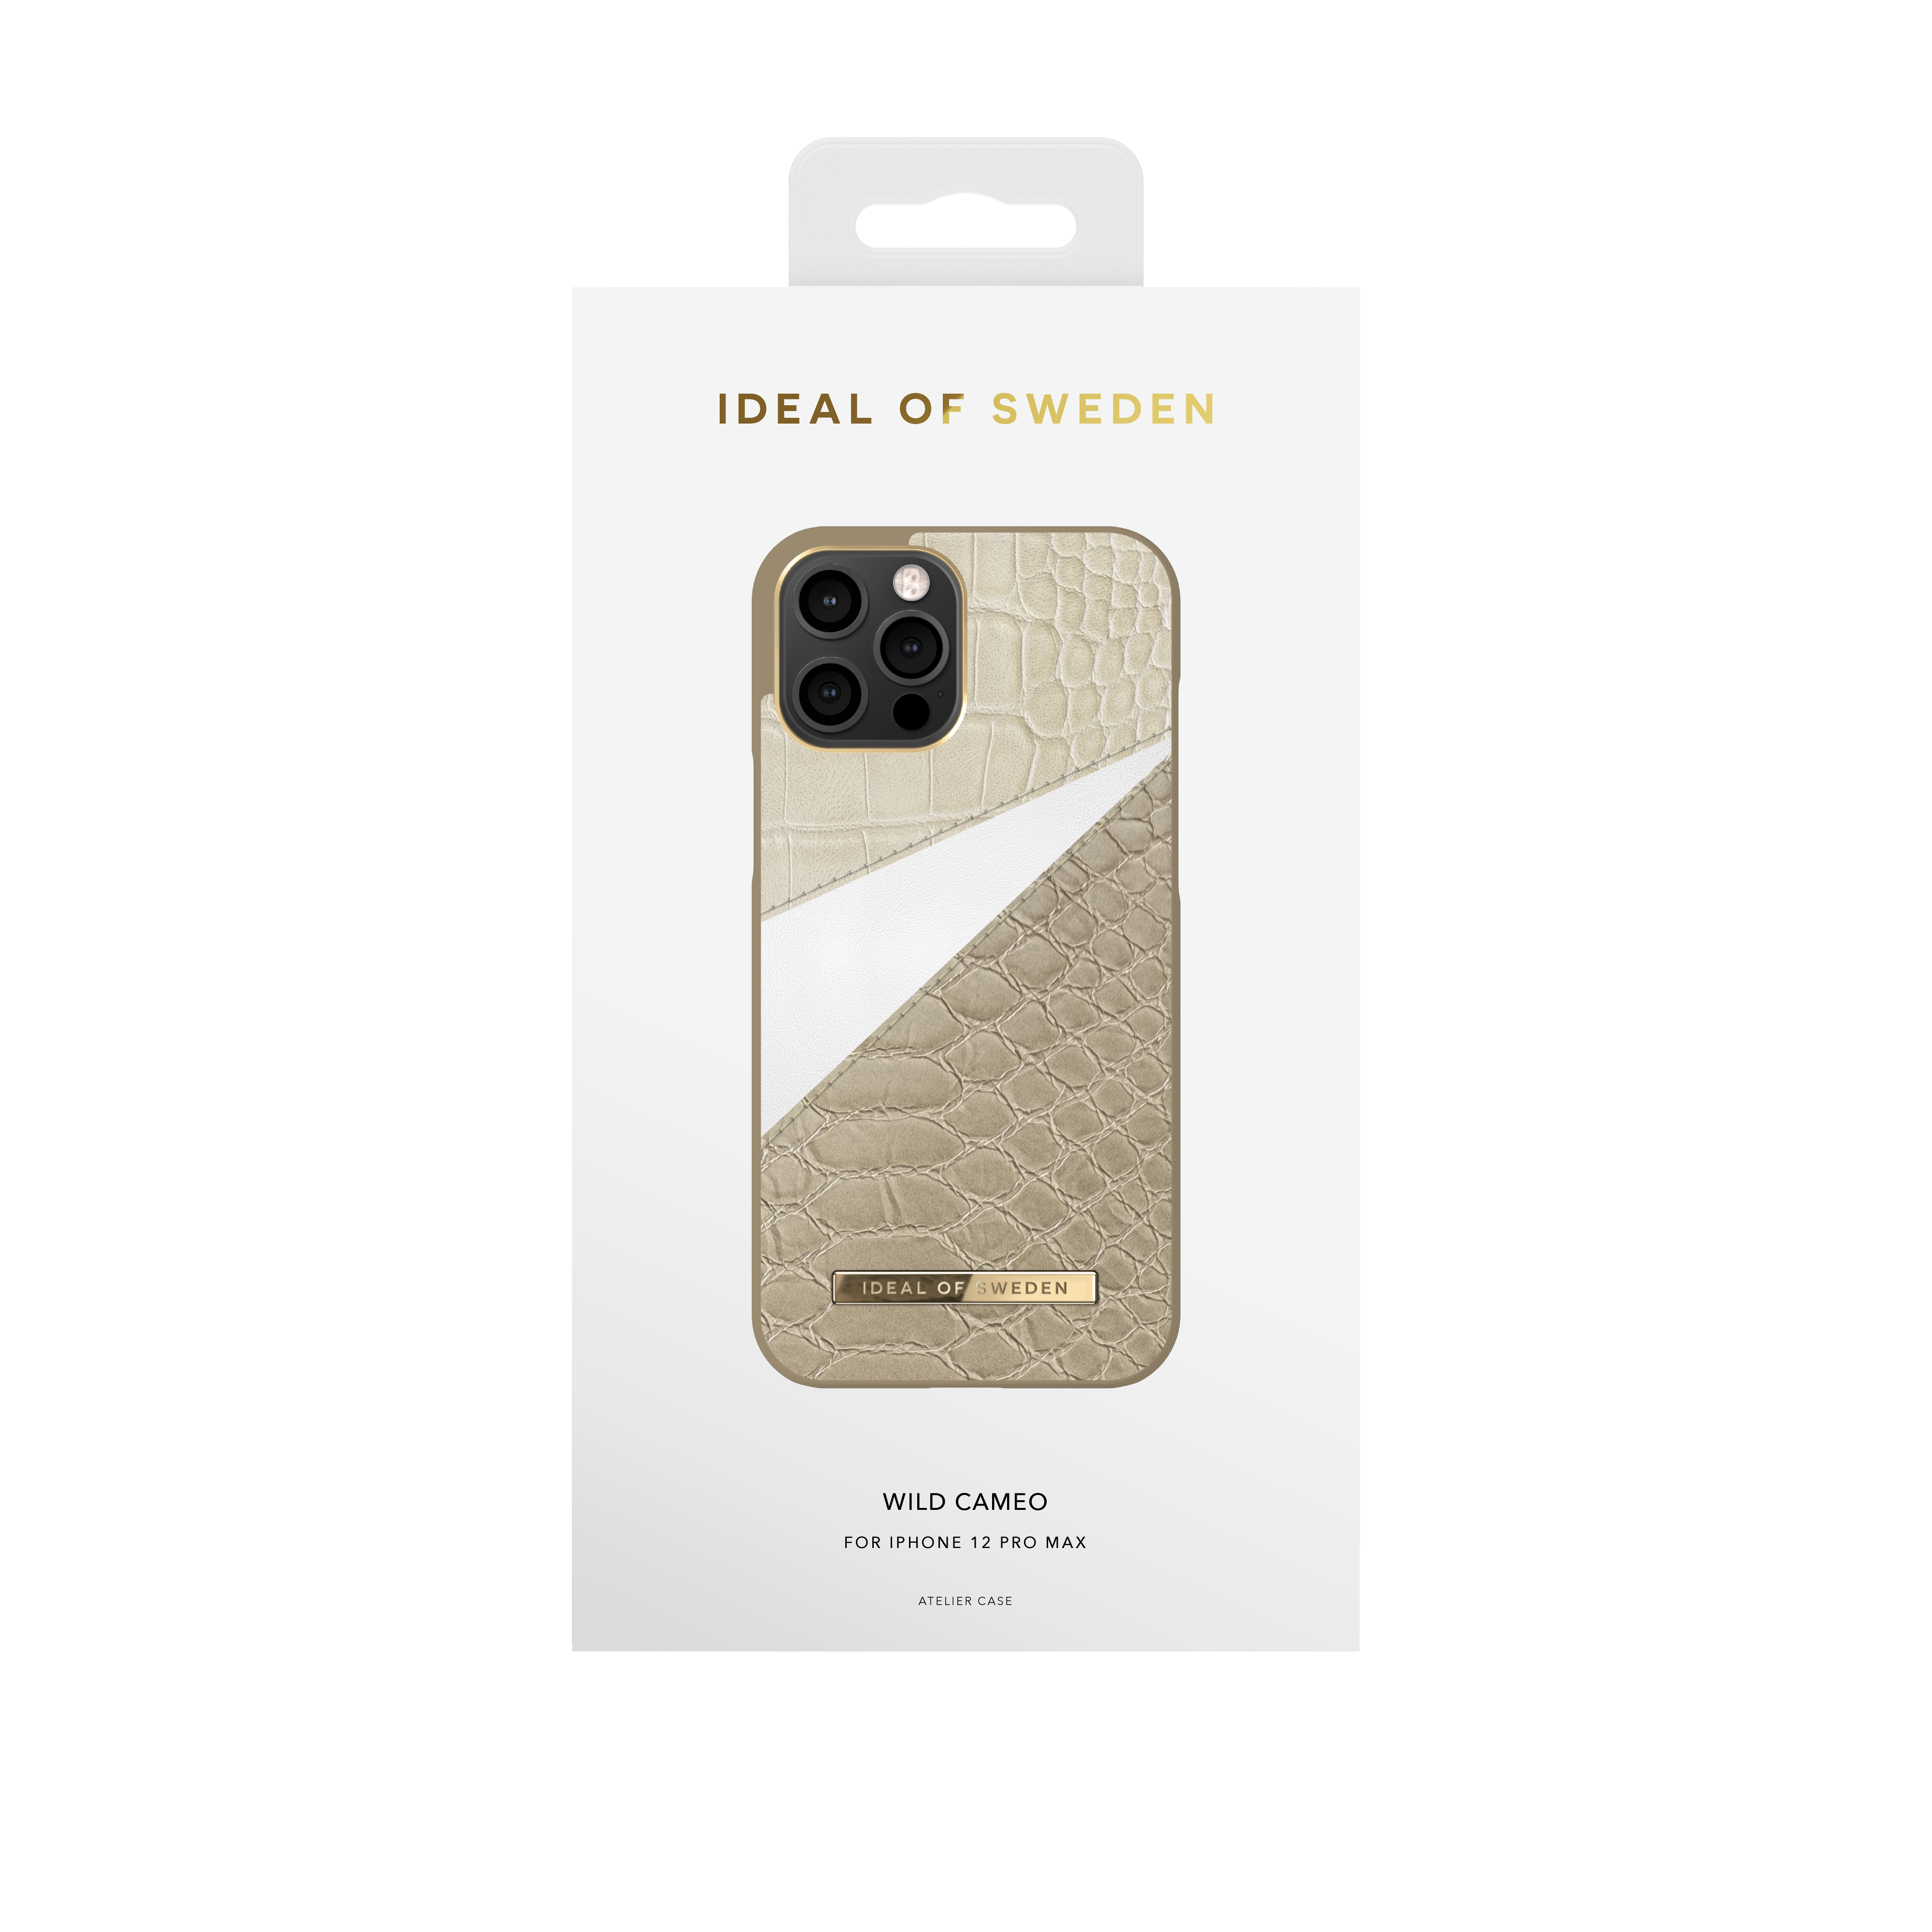 IDEAL OF SWEDEN IDACAW20-2067-246, Apple, Backcover, 12 IPhone Cameo Max, Pro Wild